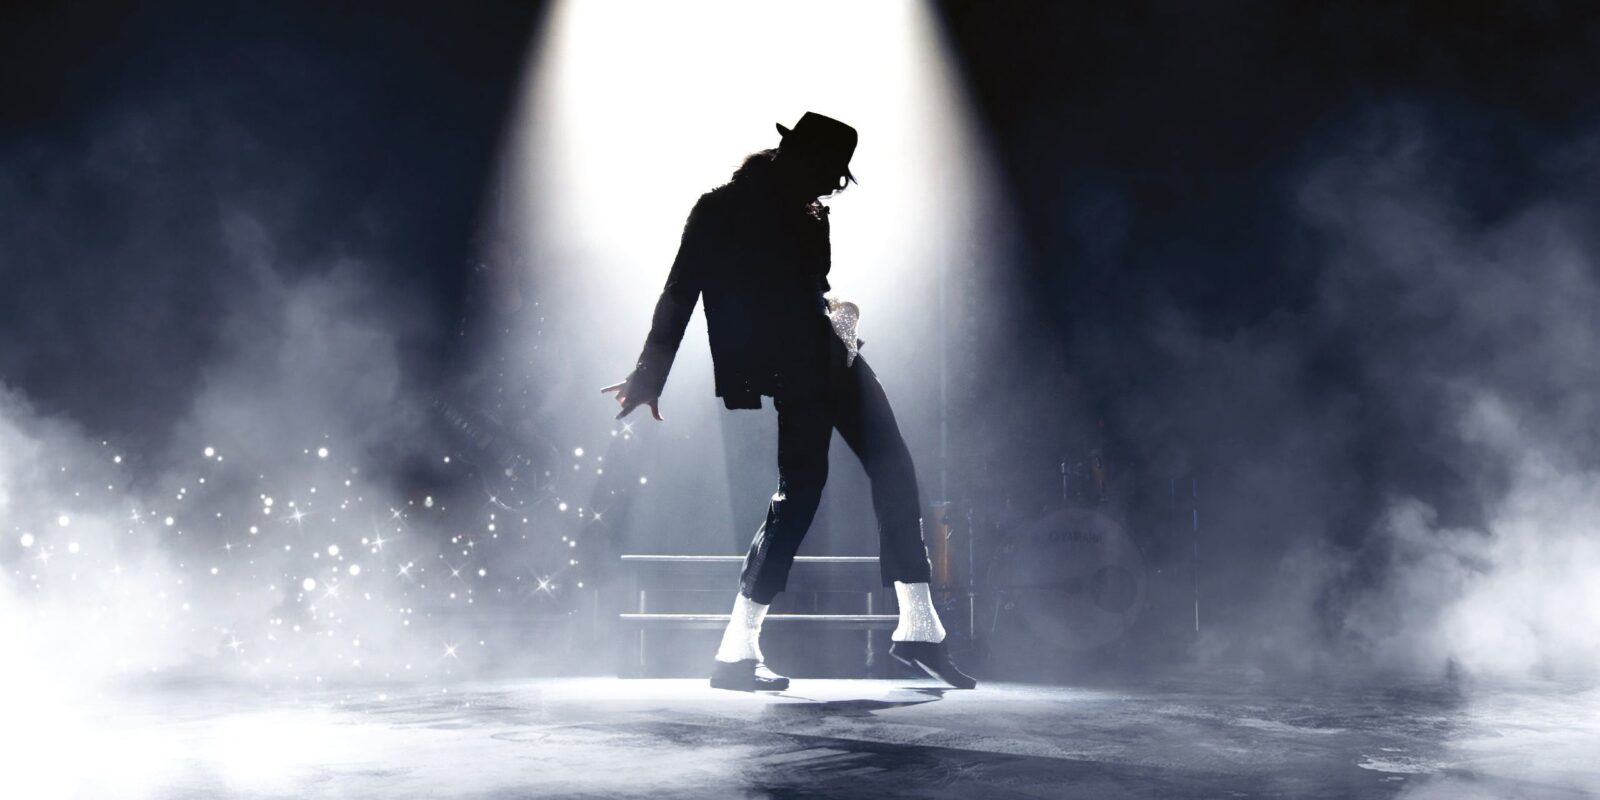 The King of Pop Show Michael Jackson Live Concert Experience